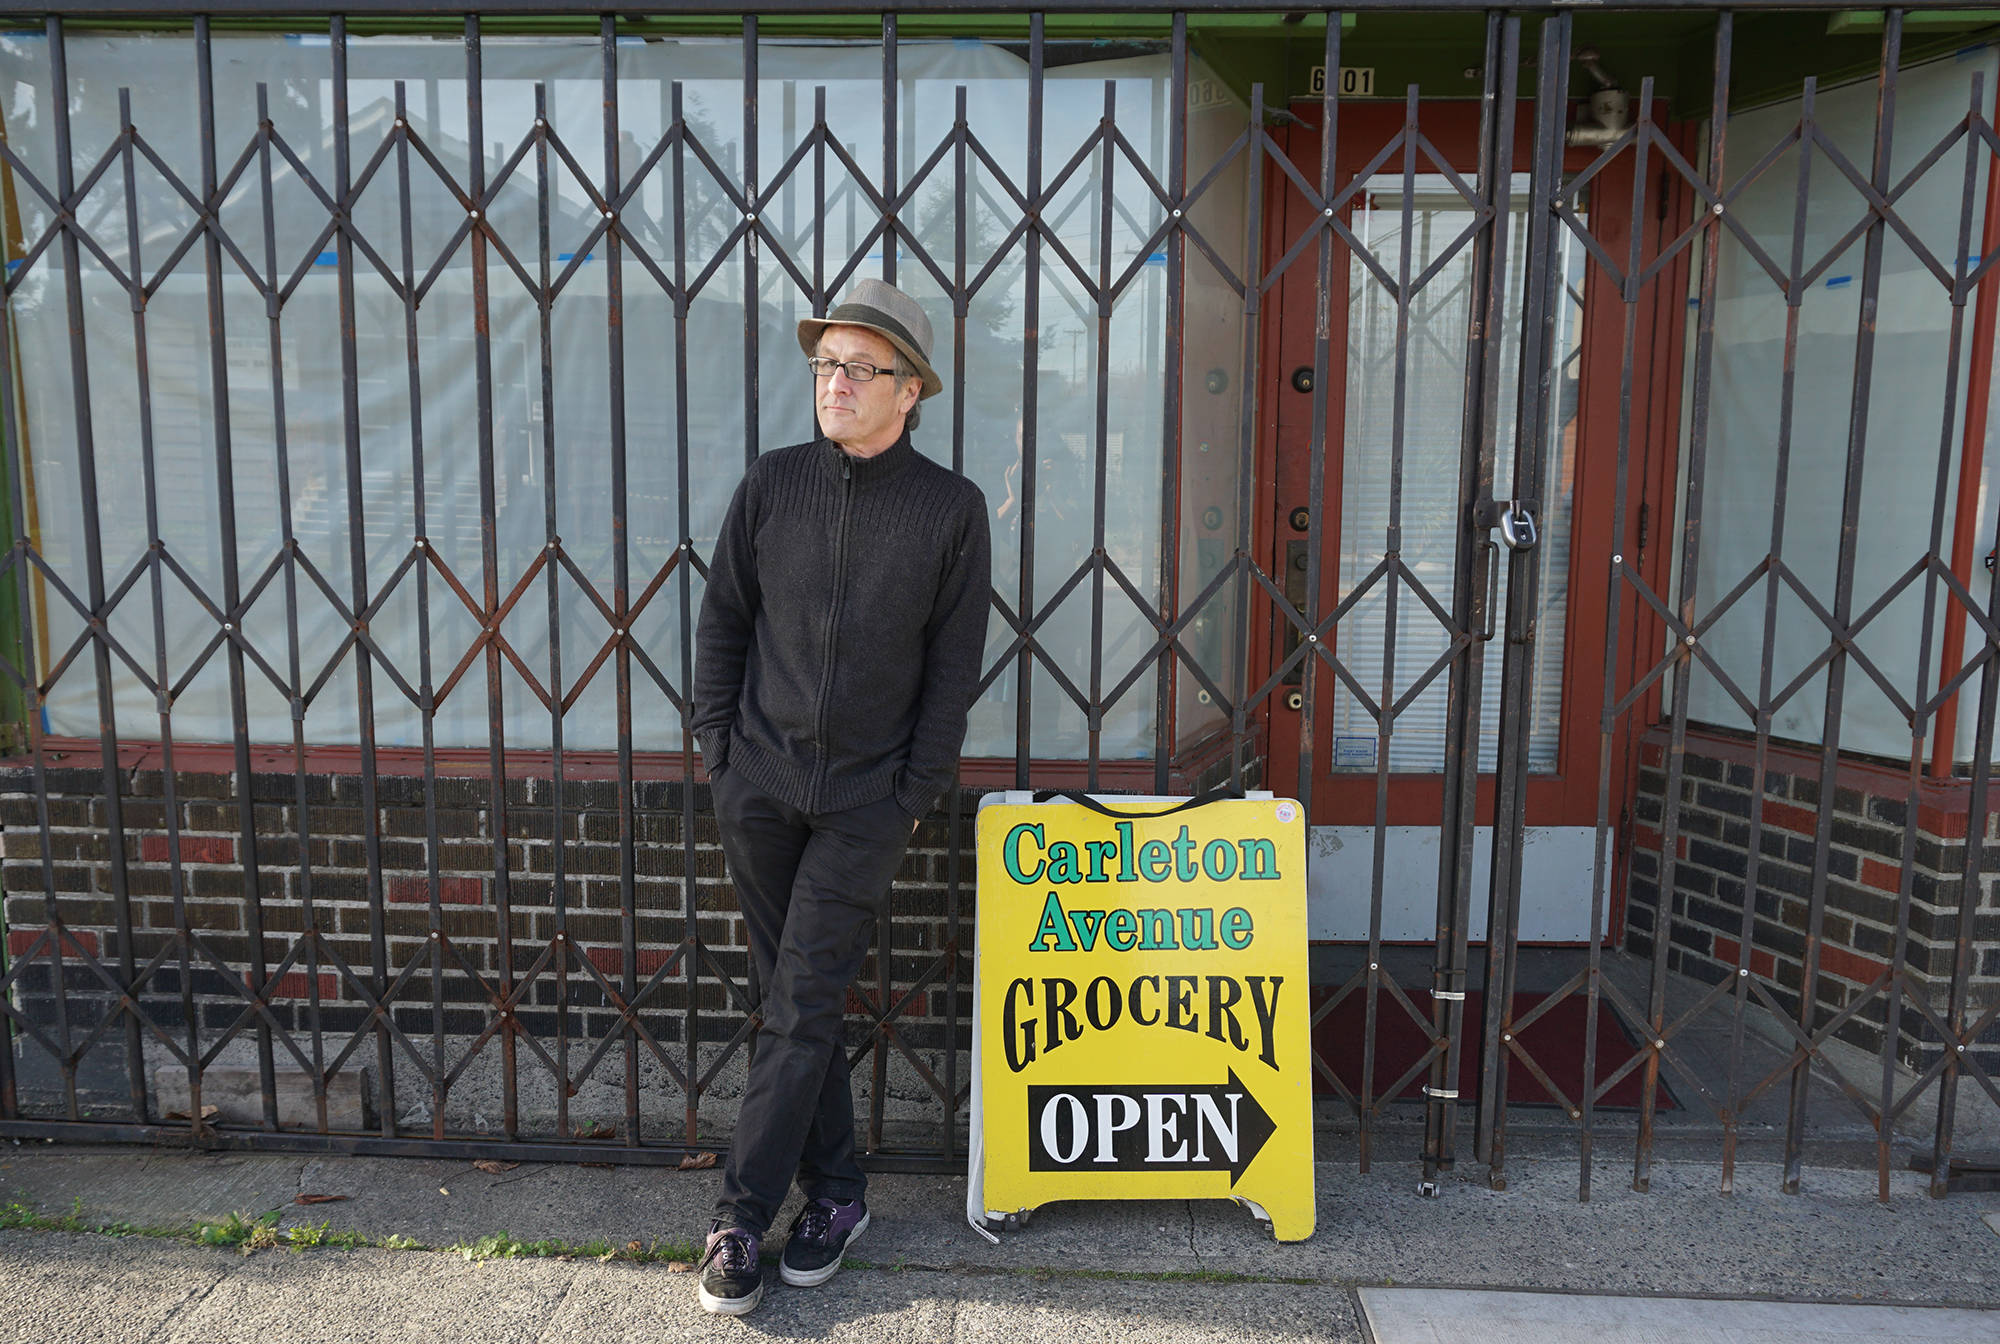 Allan Phillips, the former co-owner of Carleton Avenue Grocery, stands outside of the Georgetown establishment on Wednesday. Photo by Melissa Hellmann